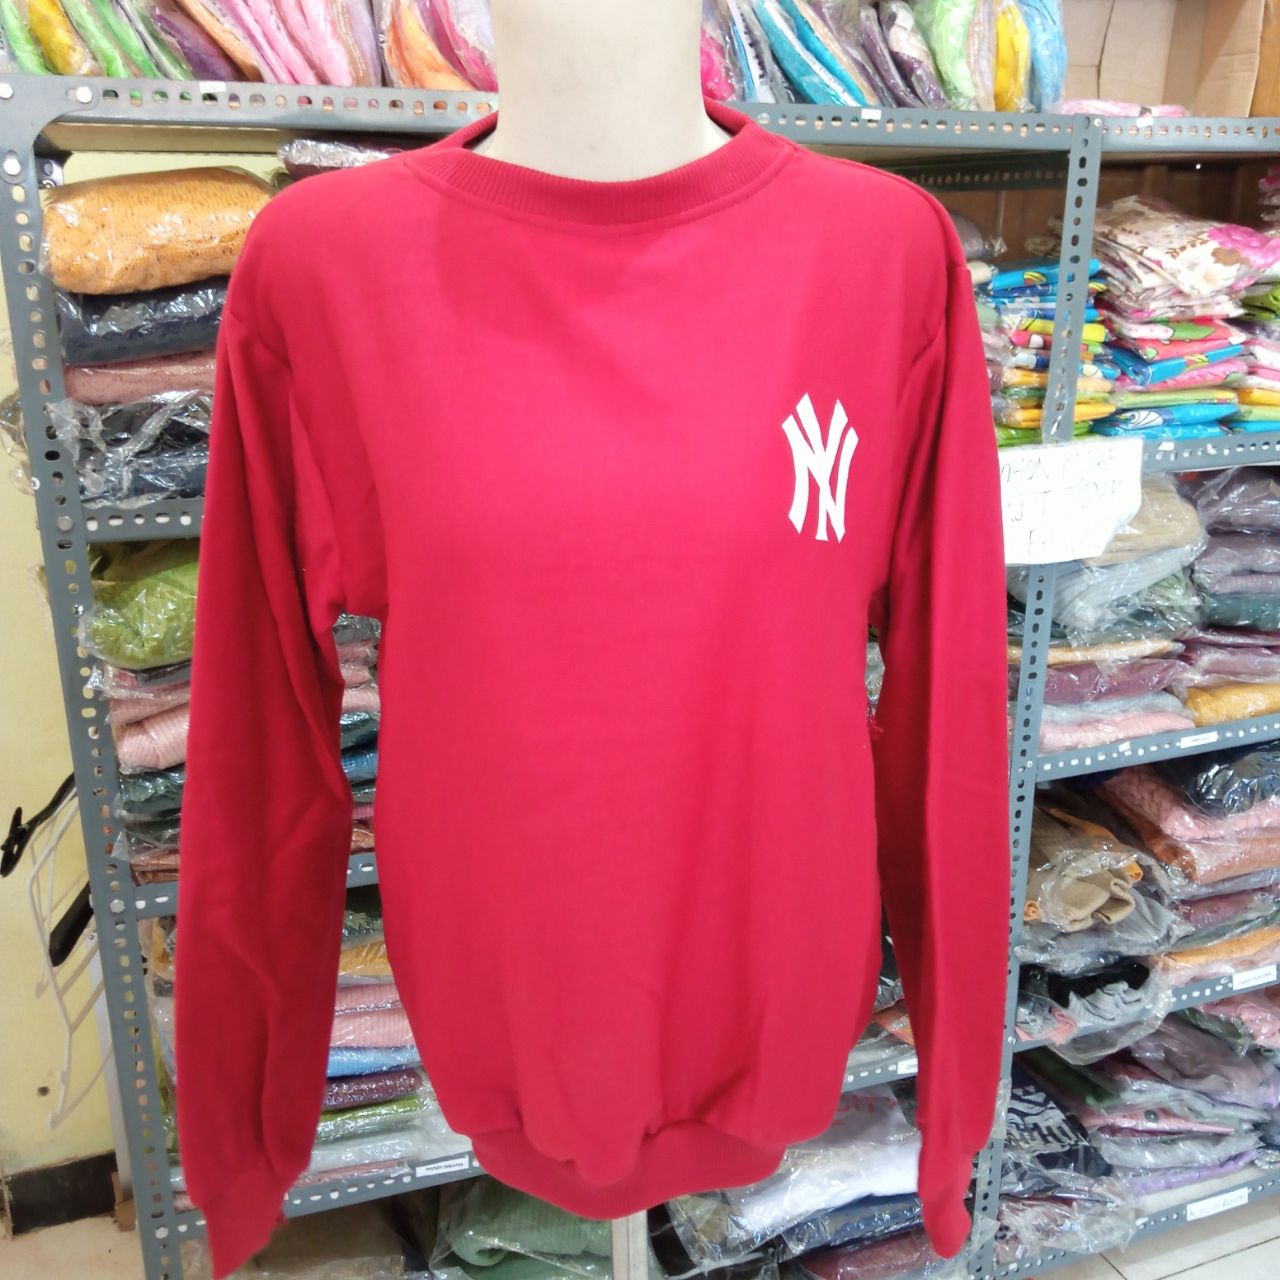 ini adalah Sweater NY2 Marun, size: LD 90cm, Panjang 60cm, material: Fleece, color: Red, brand: jaketindonesia, age_group: all ages, gender: unisex